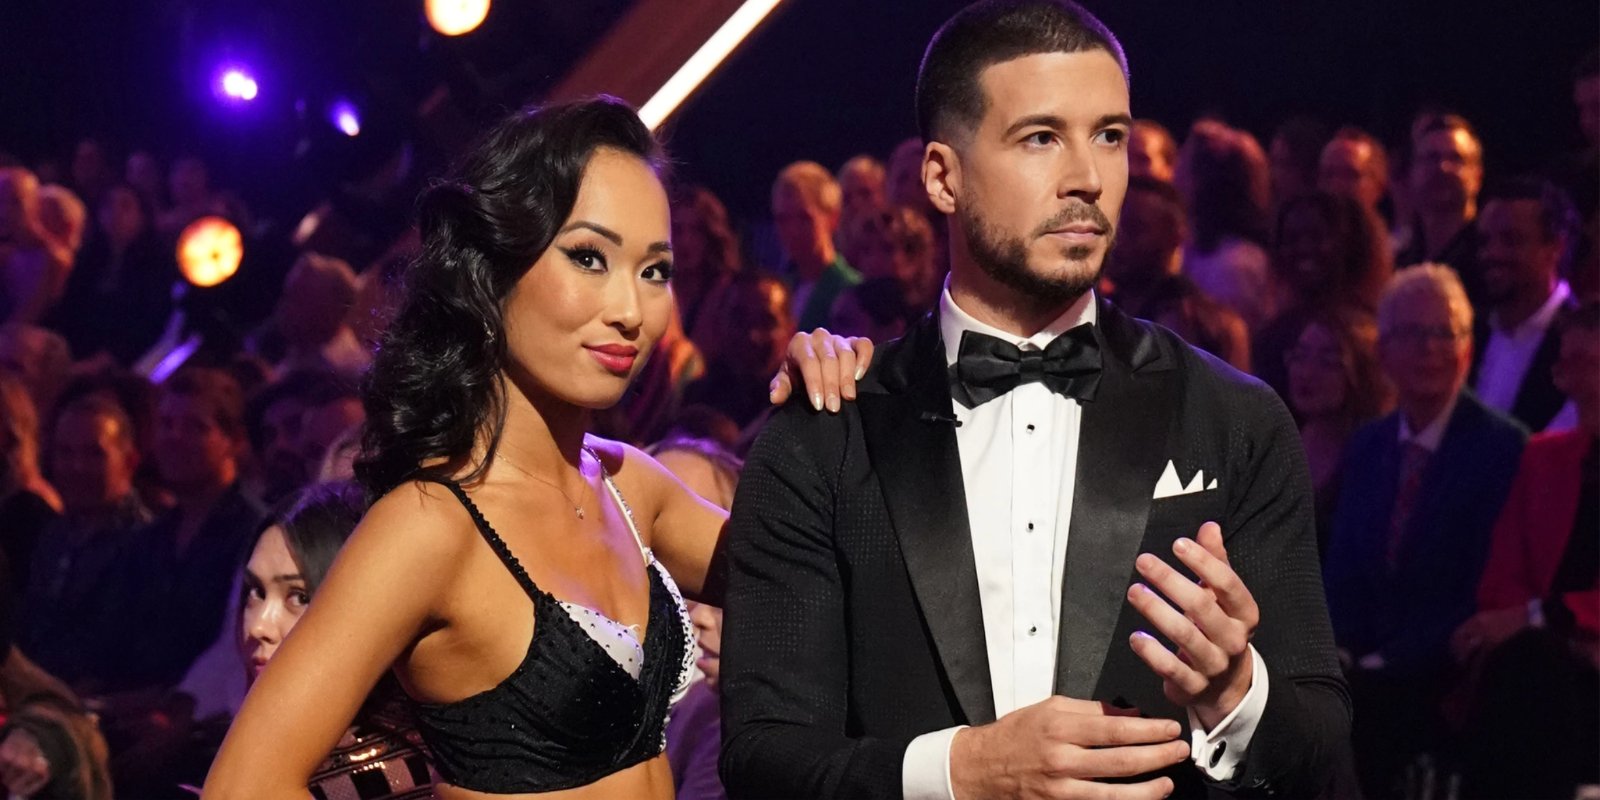 ‘Dancing With the Stars’ Pro Teaches ‘Jersey Shore’ Star ‘Self-Love’ Ahead of Disney+ Night